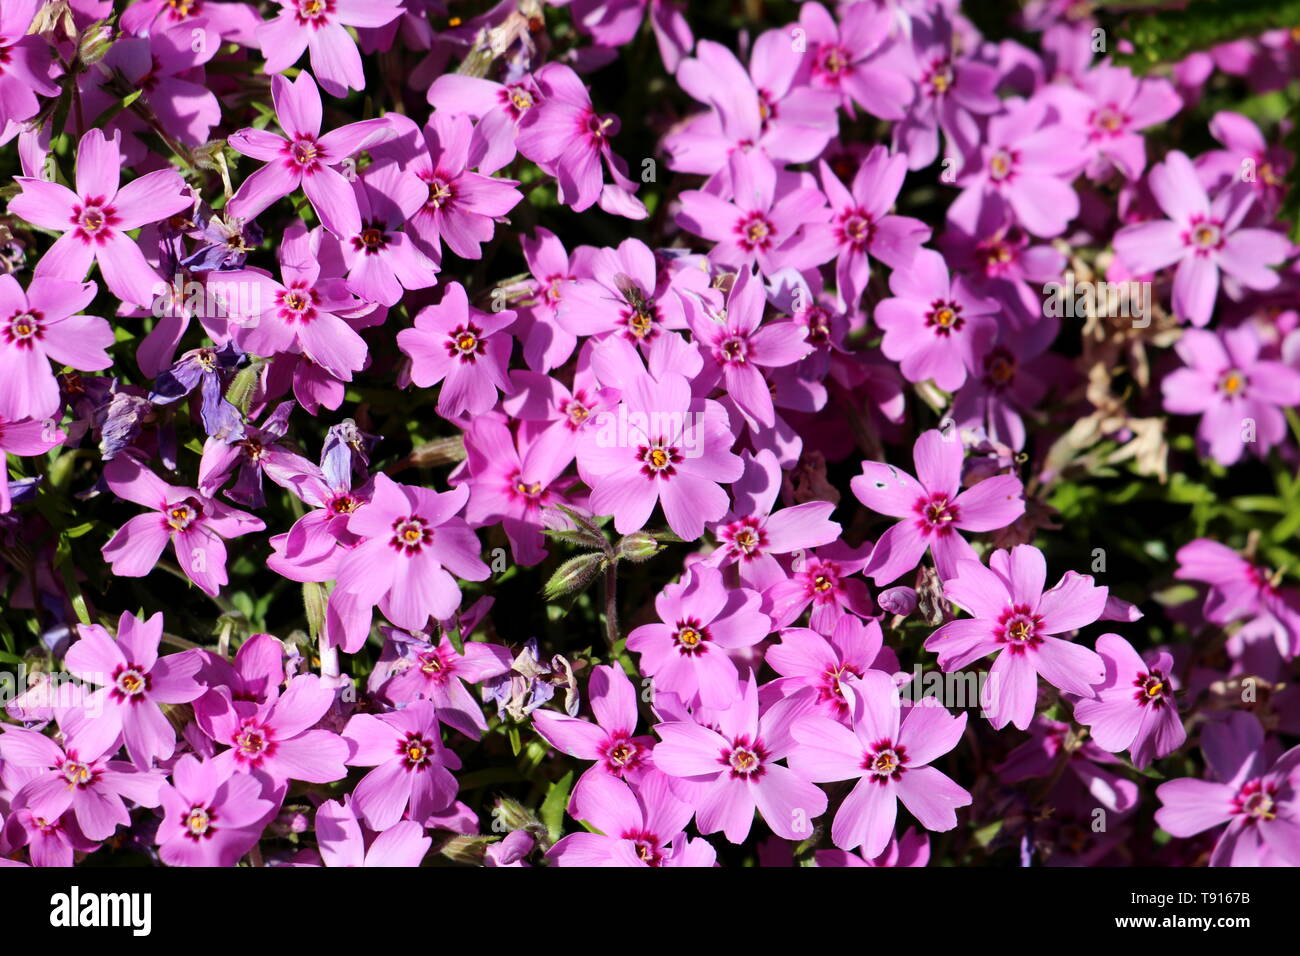 Densely planted Creeping phlox or Phlox stolonifera or Moss phlox herbaceous stoloniferous perennial plant growing as hedge in local garden Stock Photo